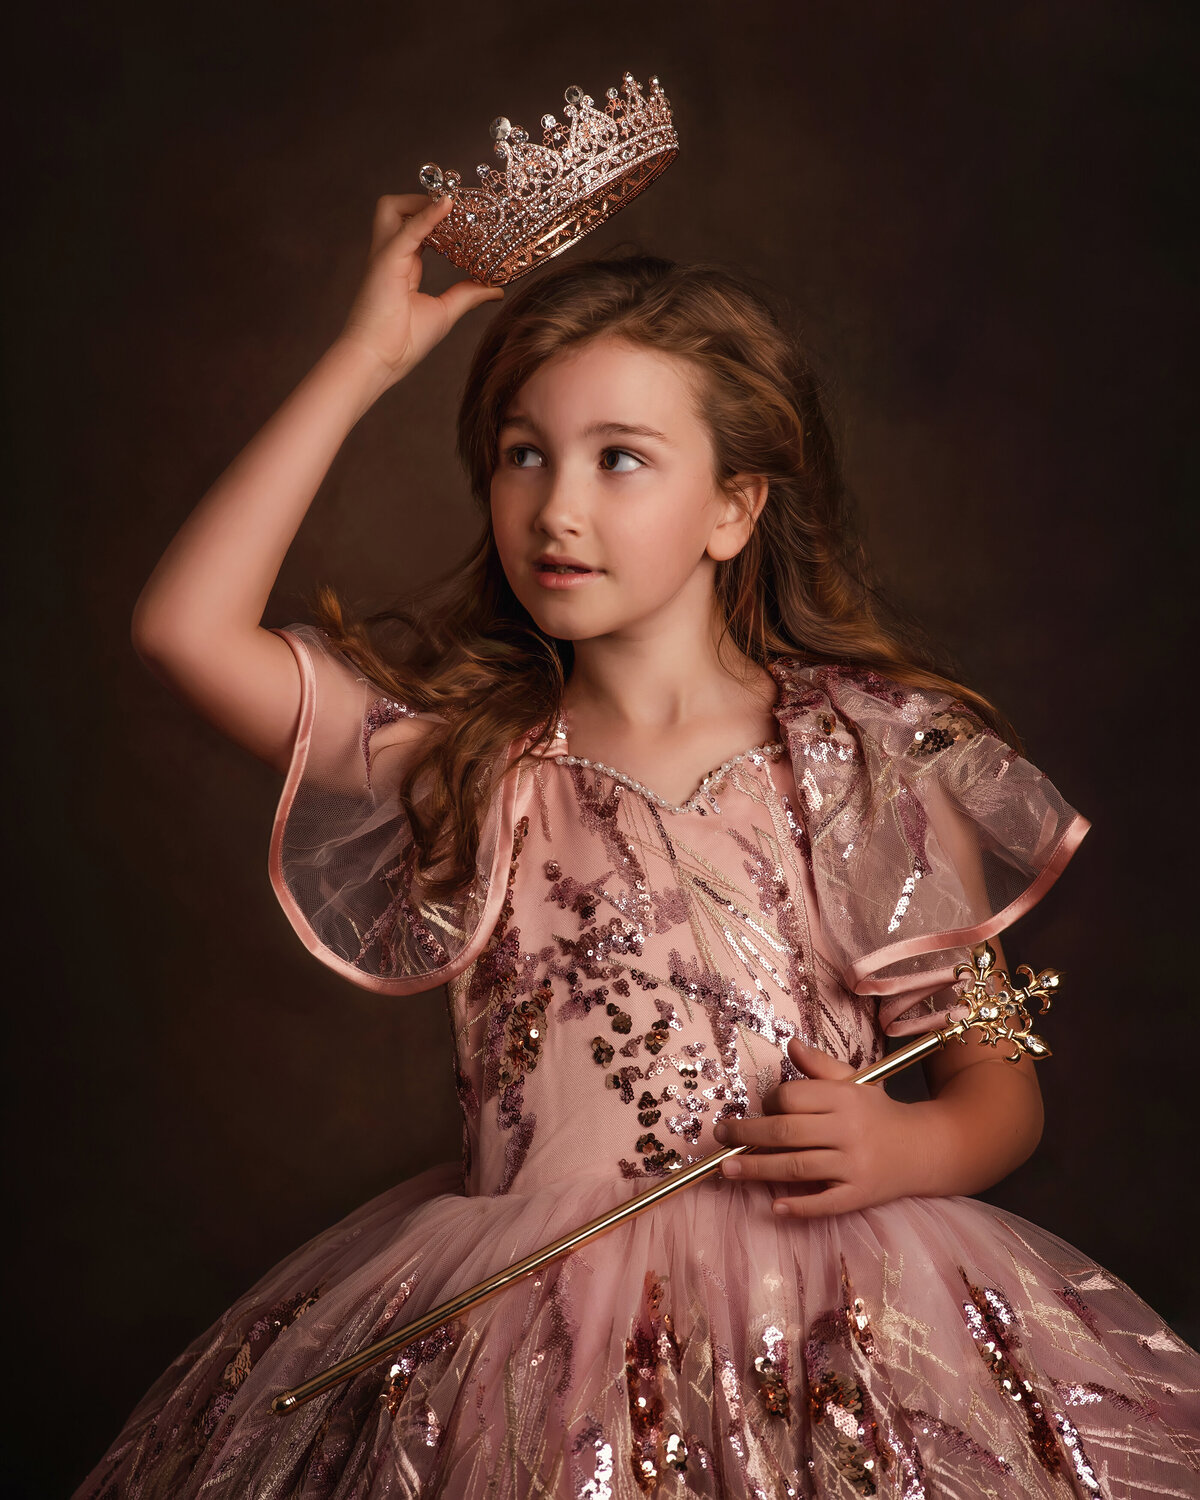 Girl wearing couture dress with crown